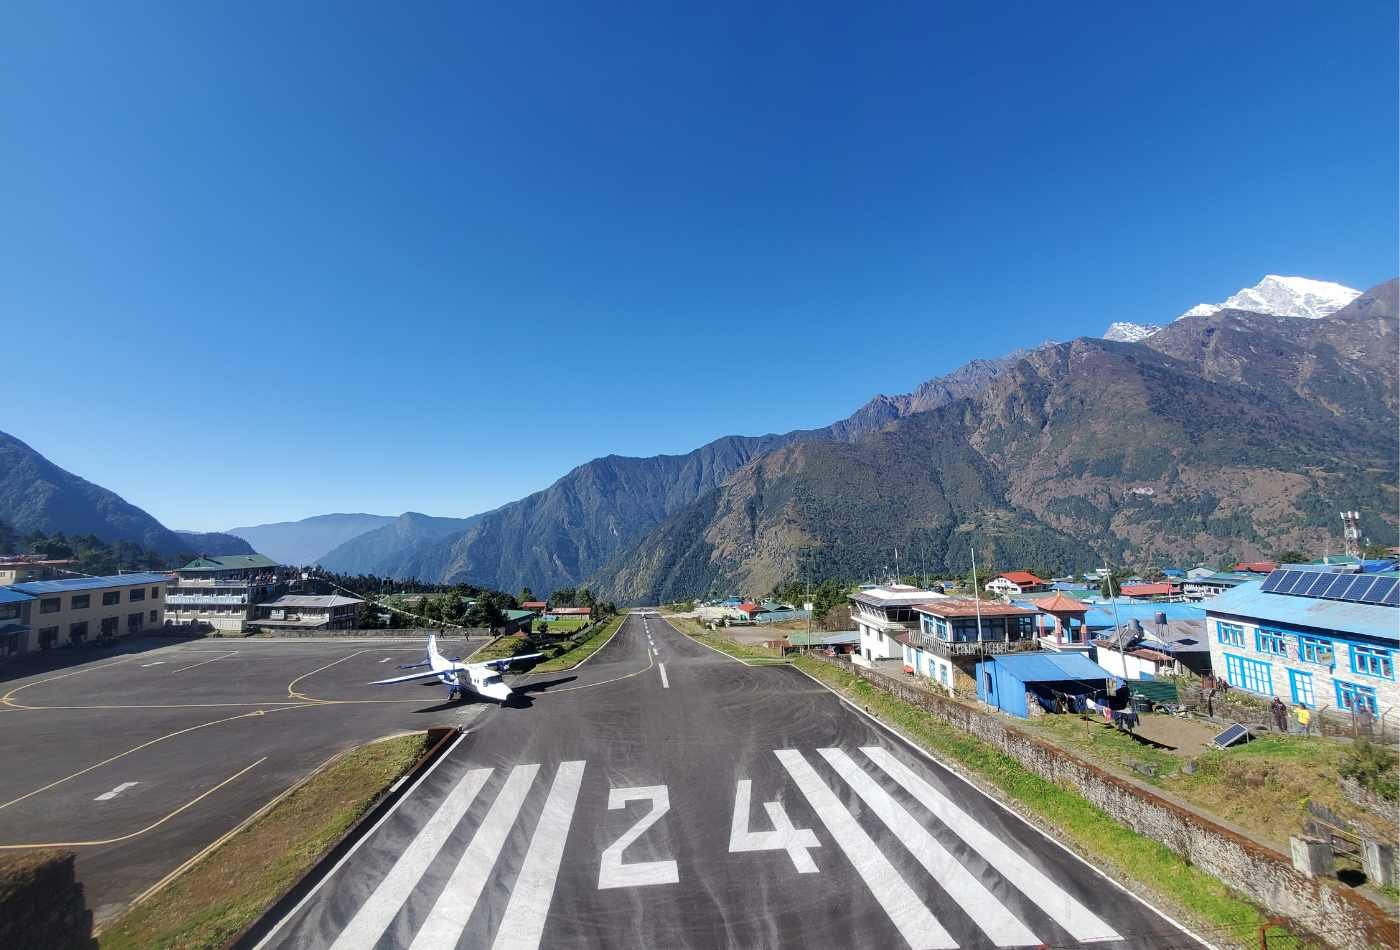 Lukla Airport, a small mountain airport with an airplane ready for take-off on a clear day, providing access to the trekking routes to Mount Everest.